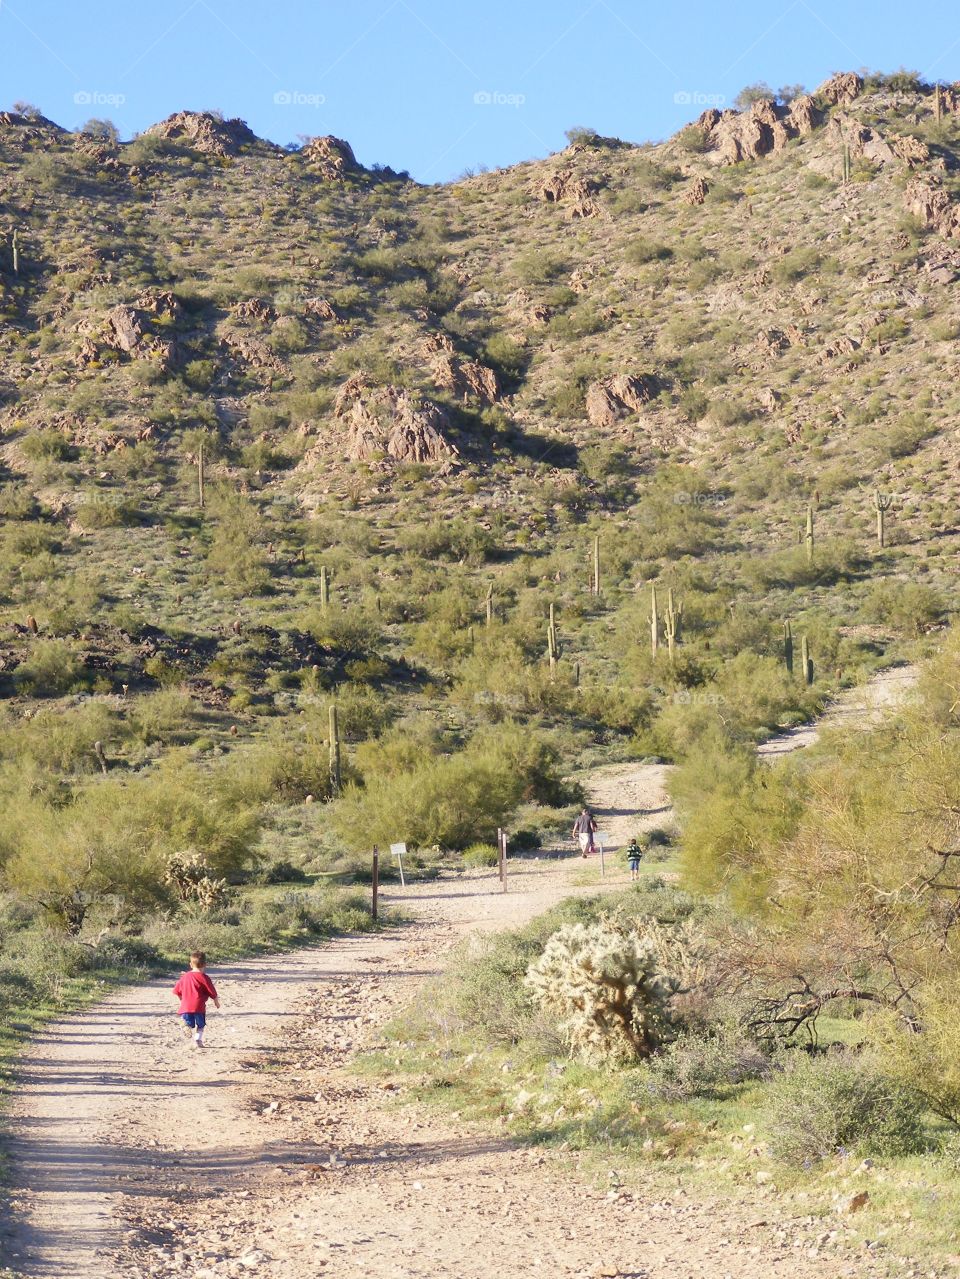 This trail is at a state park in the Arizona desert.